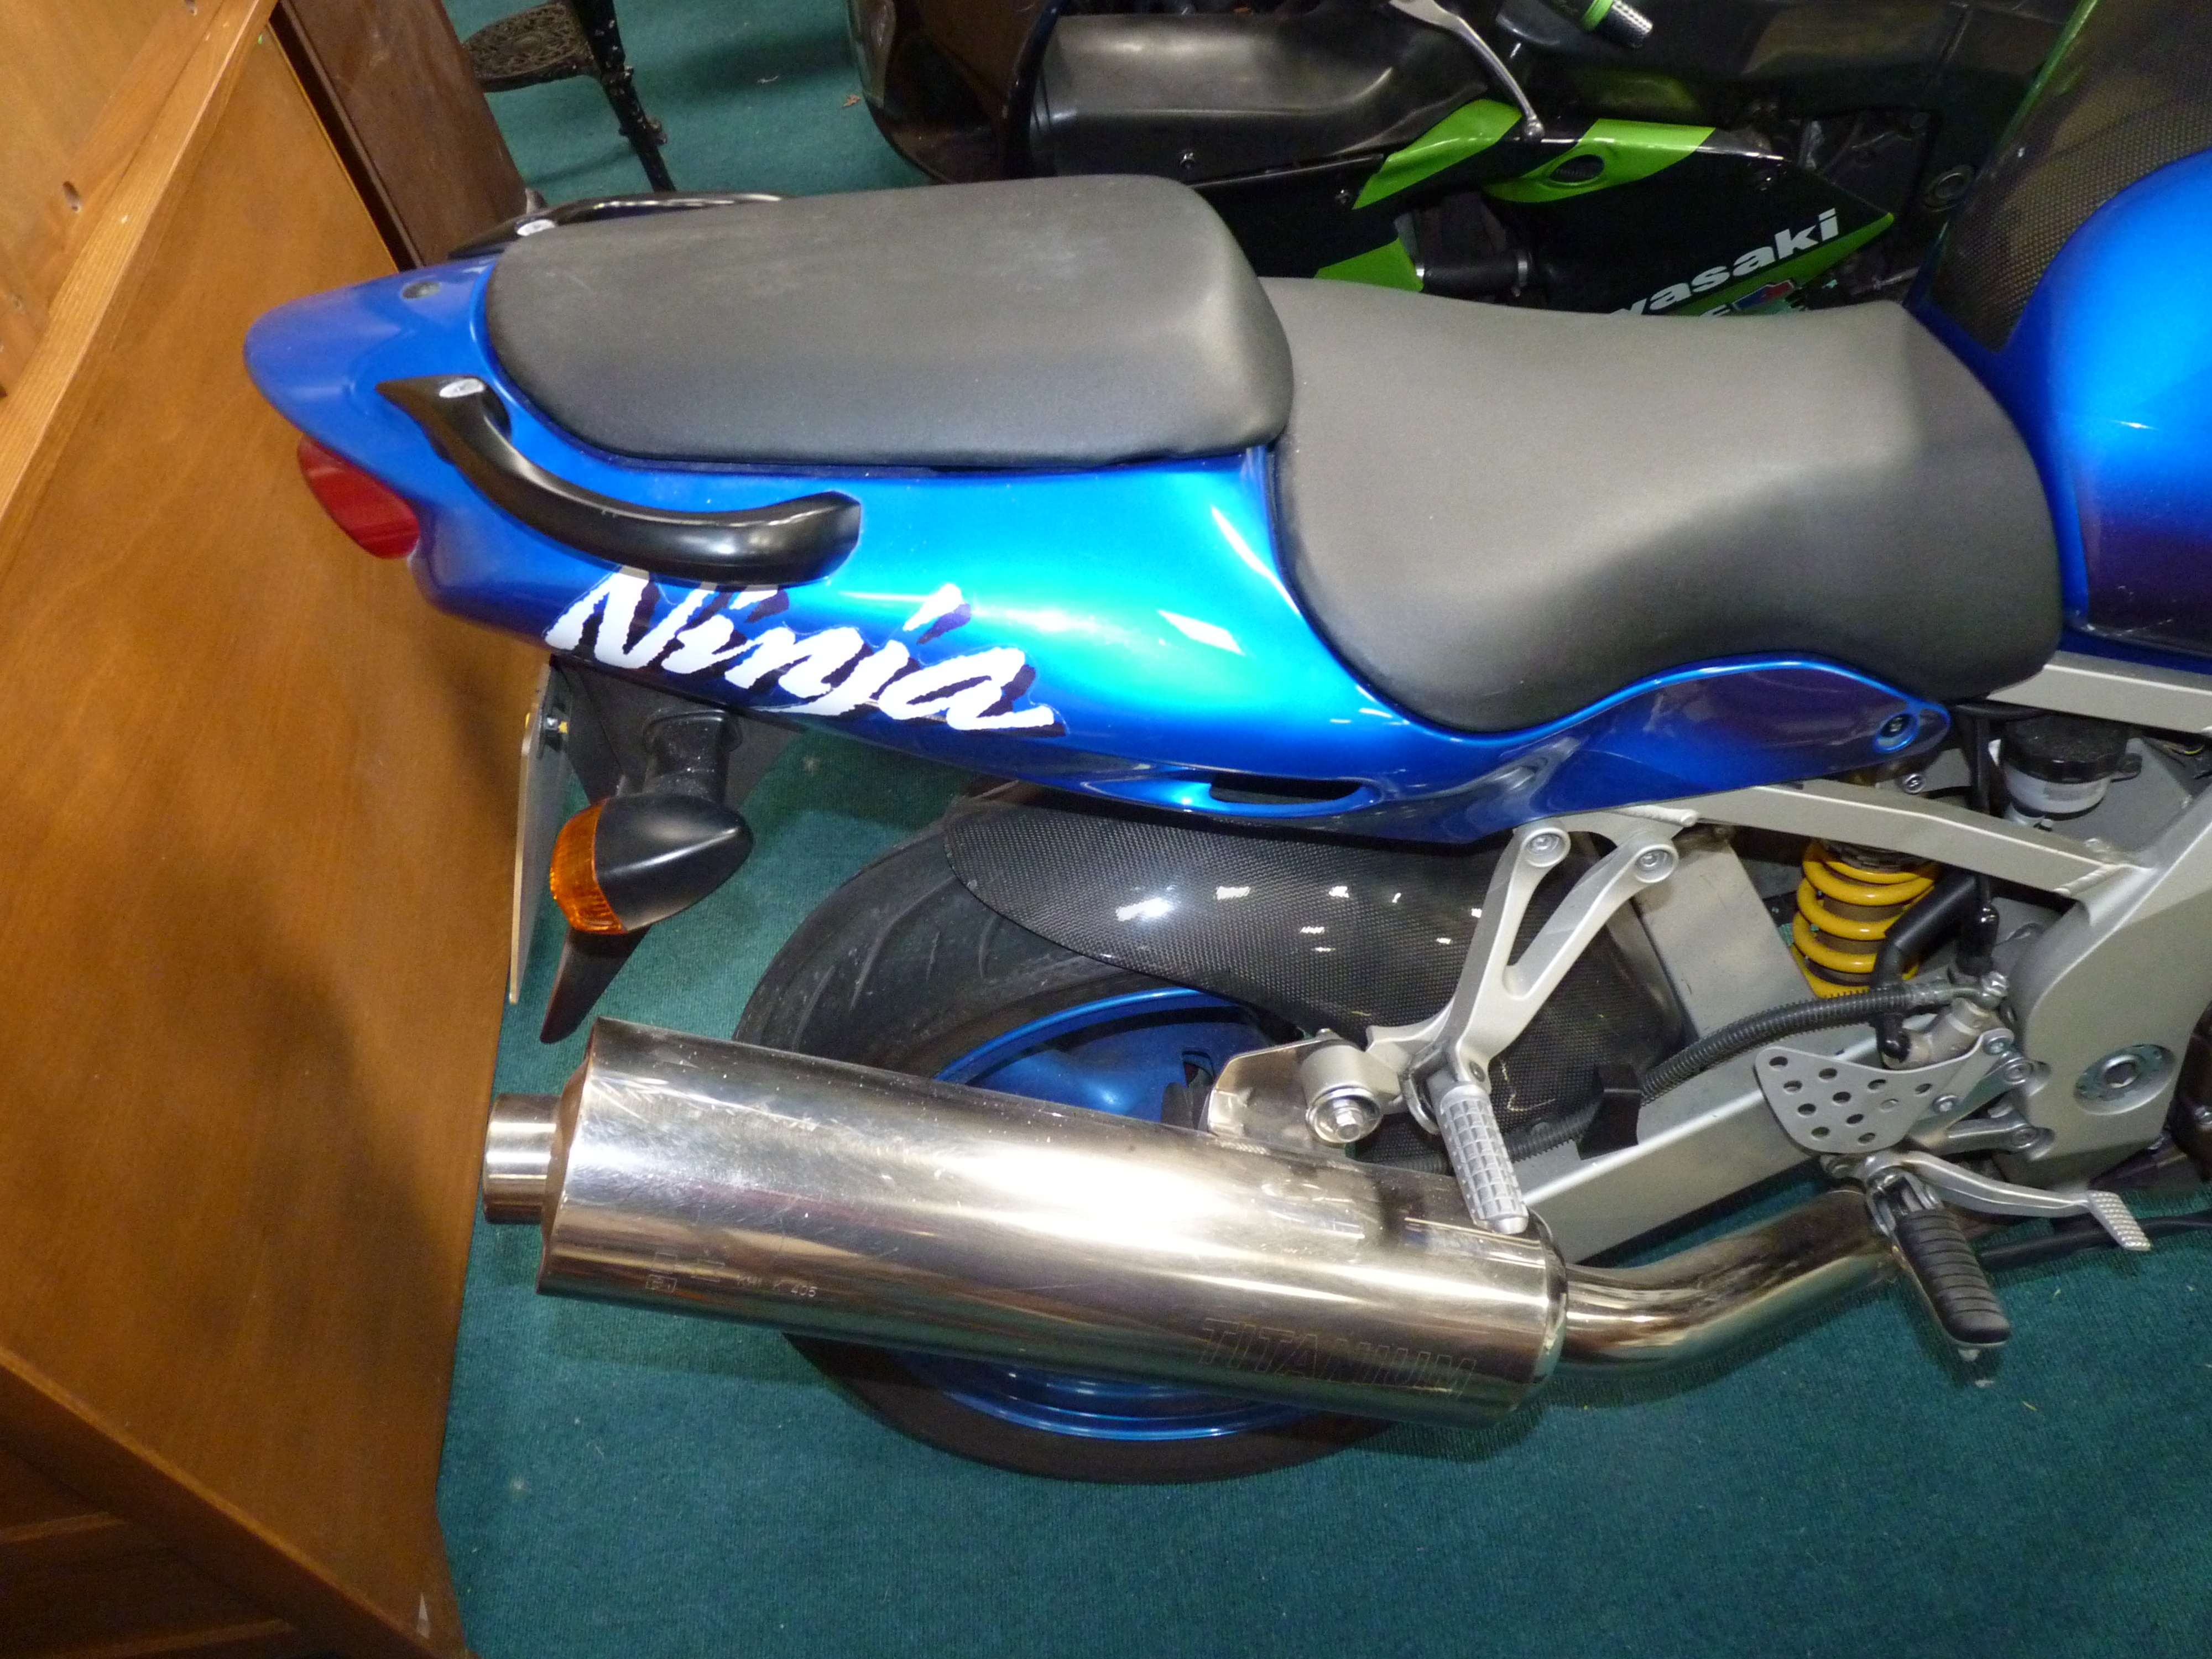 Kawasaki ZX 900 - C2 1999 T744RAA March 1999 11,083 Miles good condition overall slight dent on - Image 2 of 7